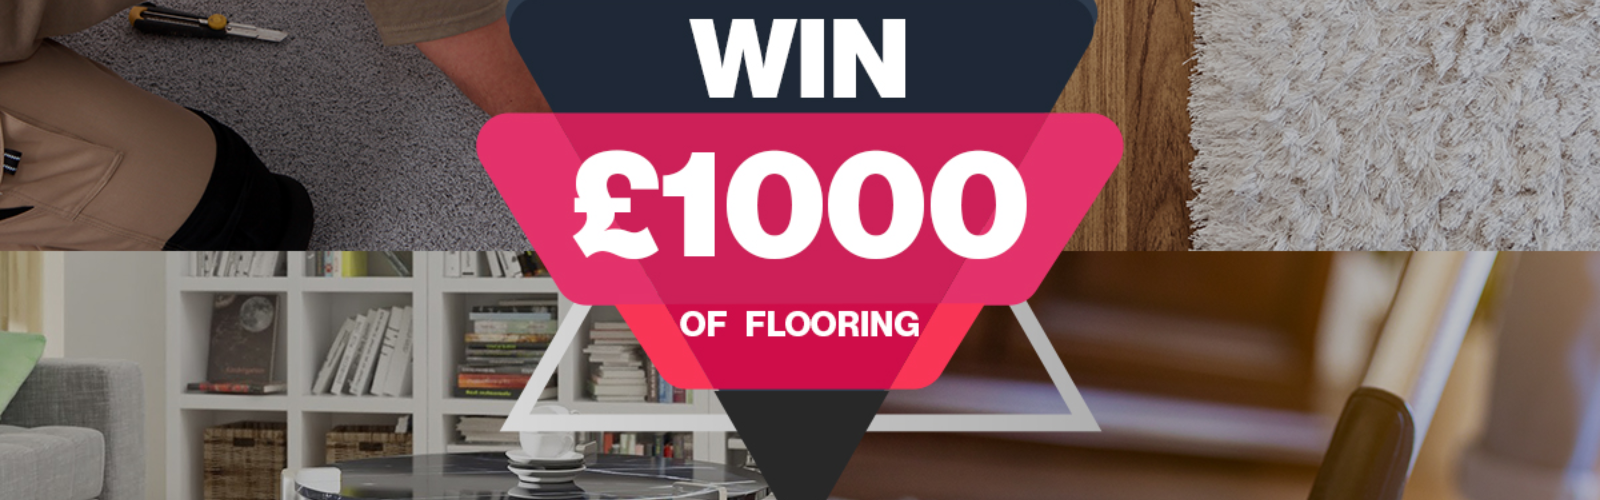 Our £1000 of flooring competition 